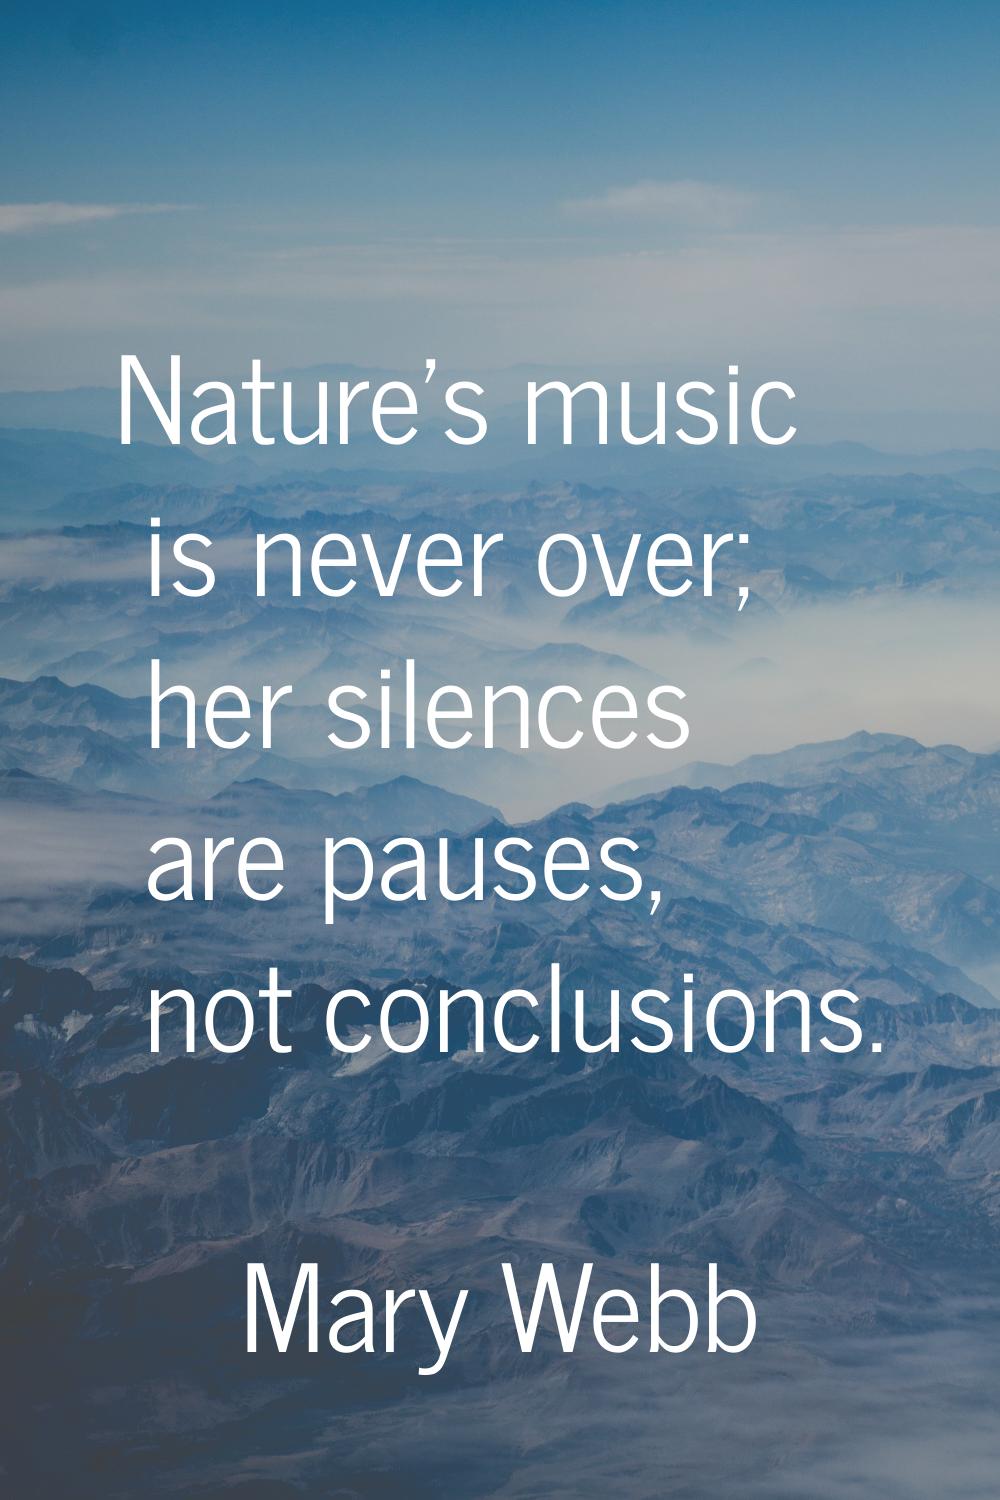 Nature's music is never over; her silences are pauses, not conclusions.